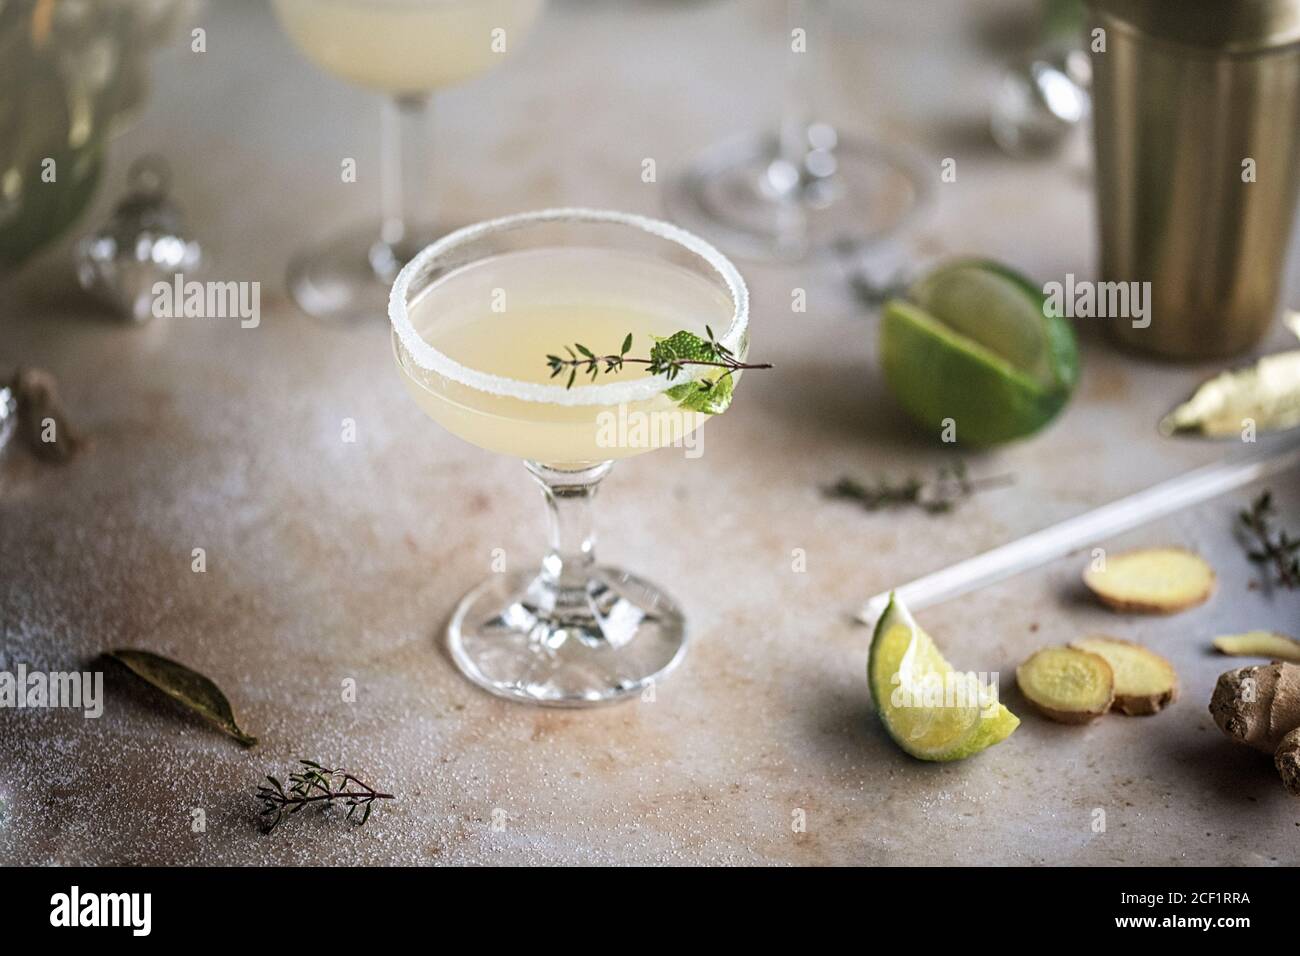 Ginger lime cocktail with herb garnish Stock Photo